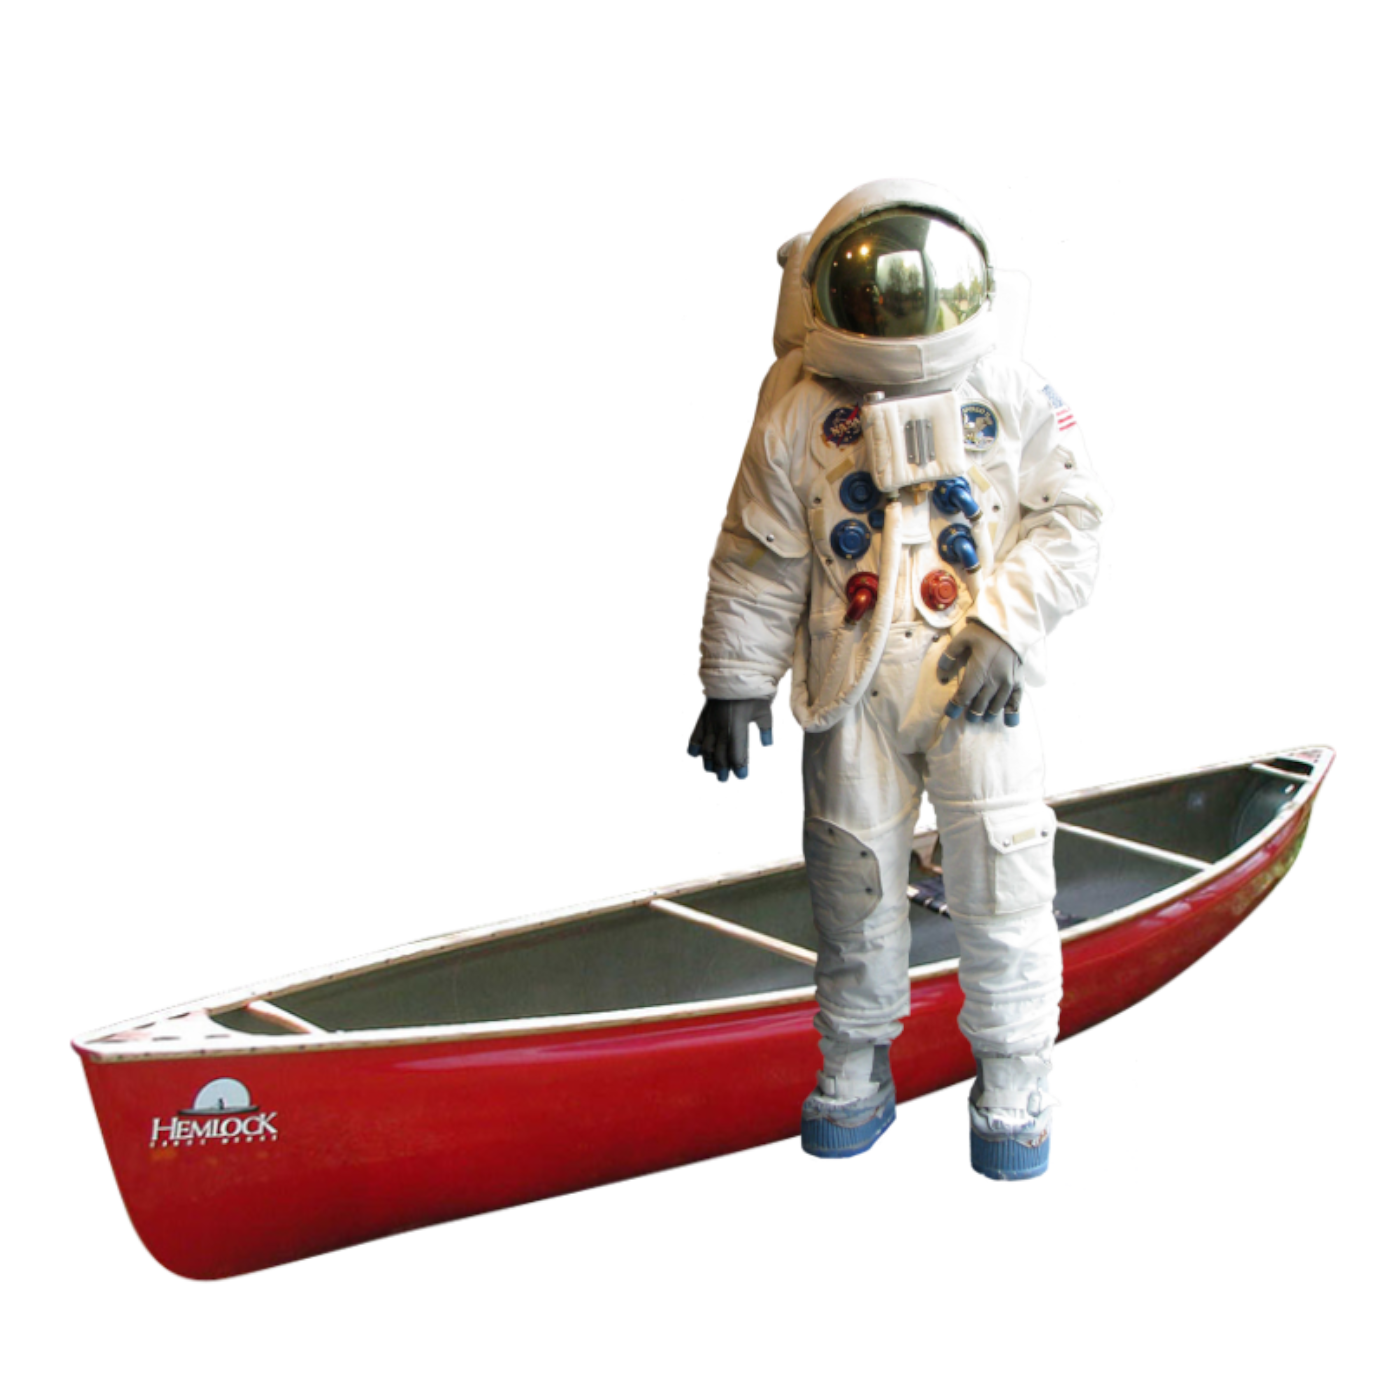 Astronaut and his canoe